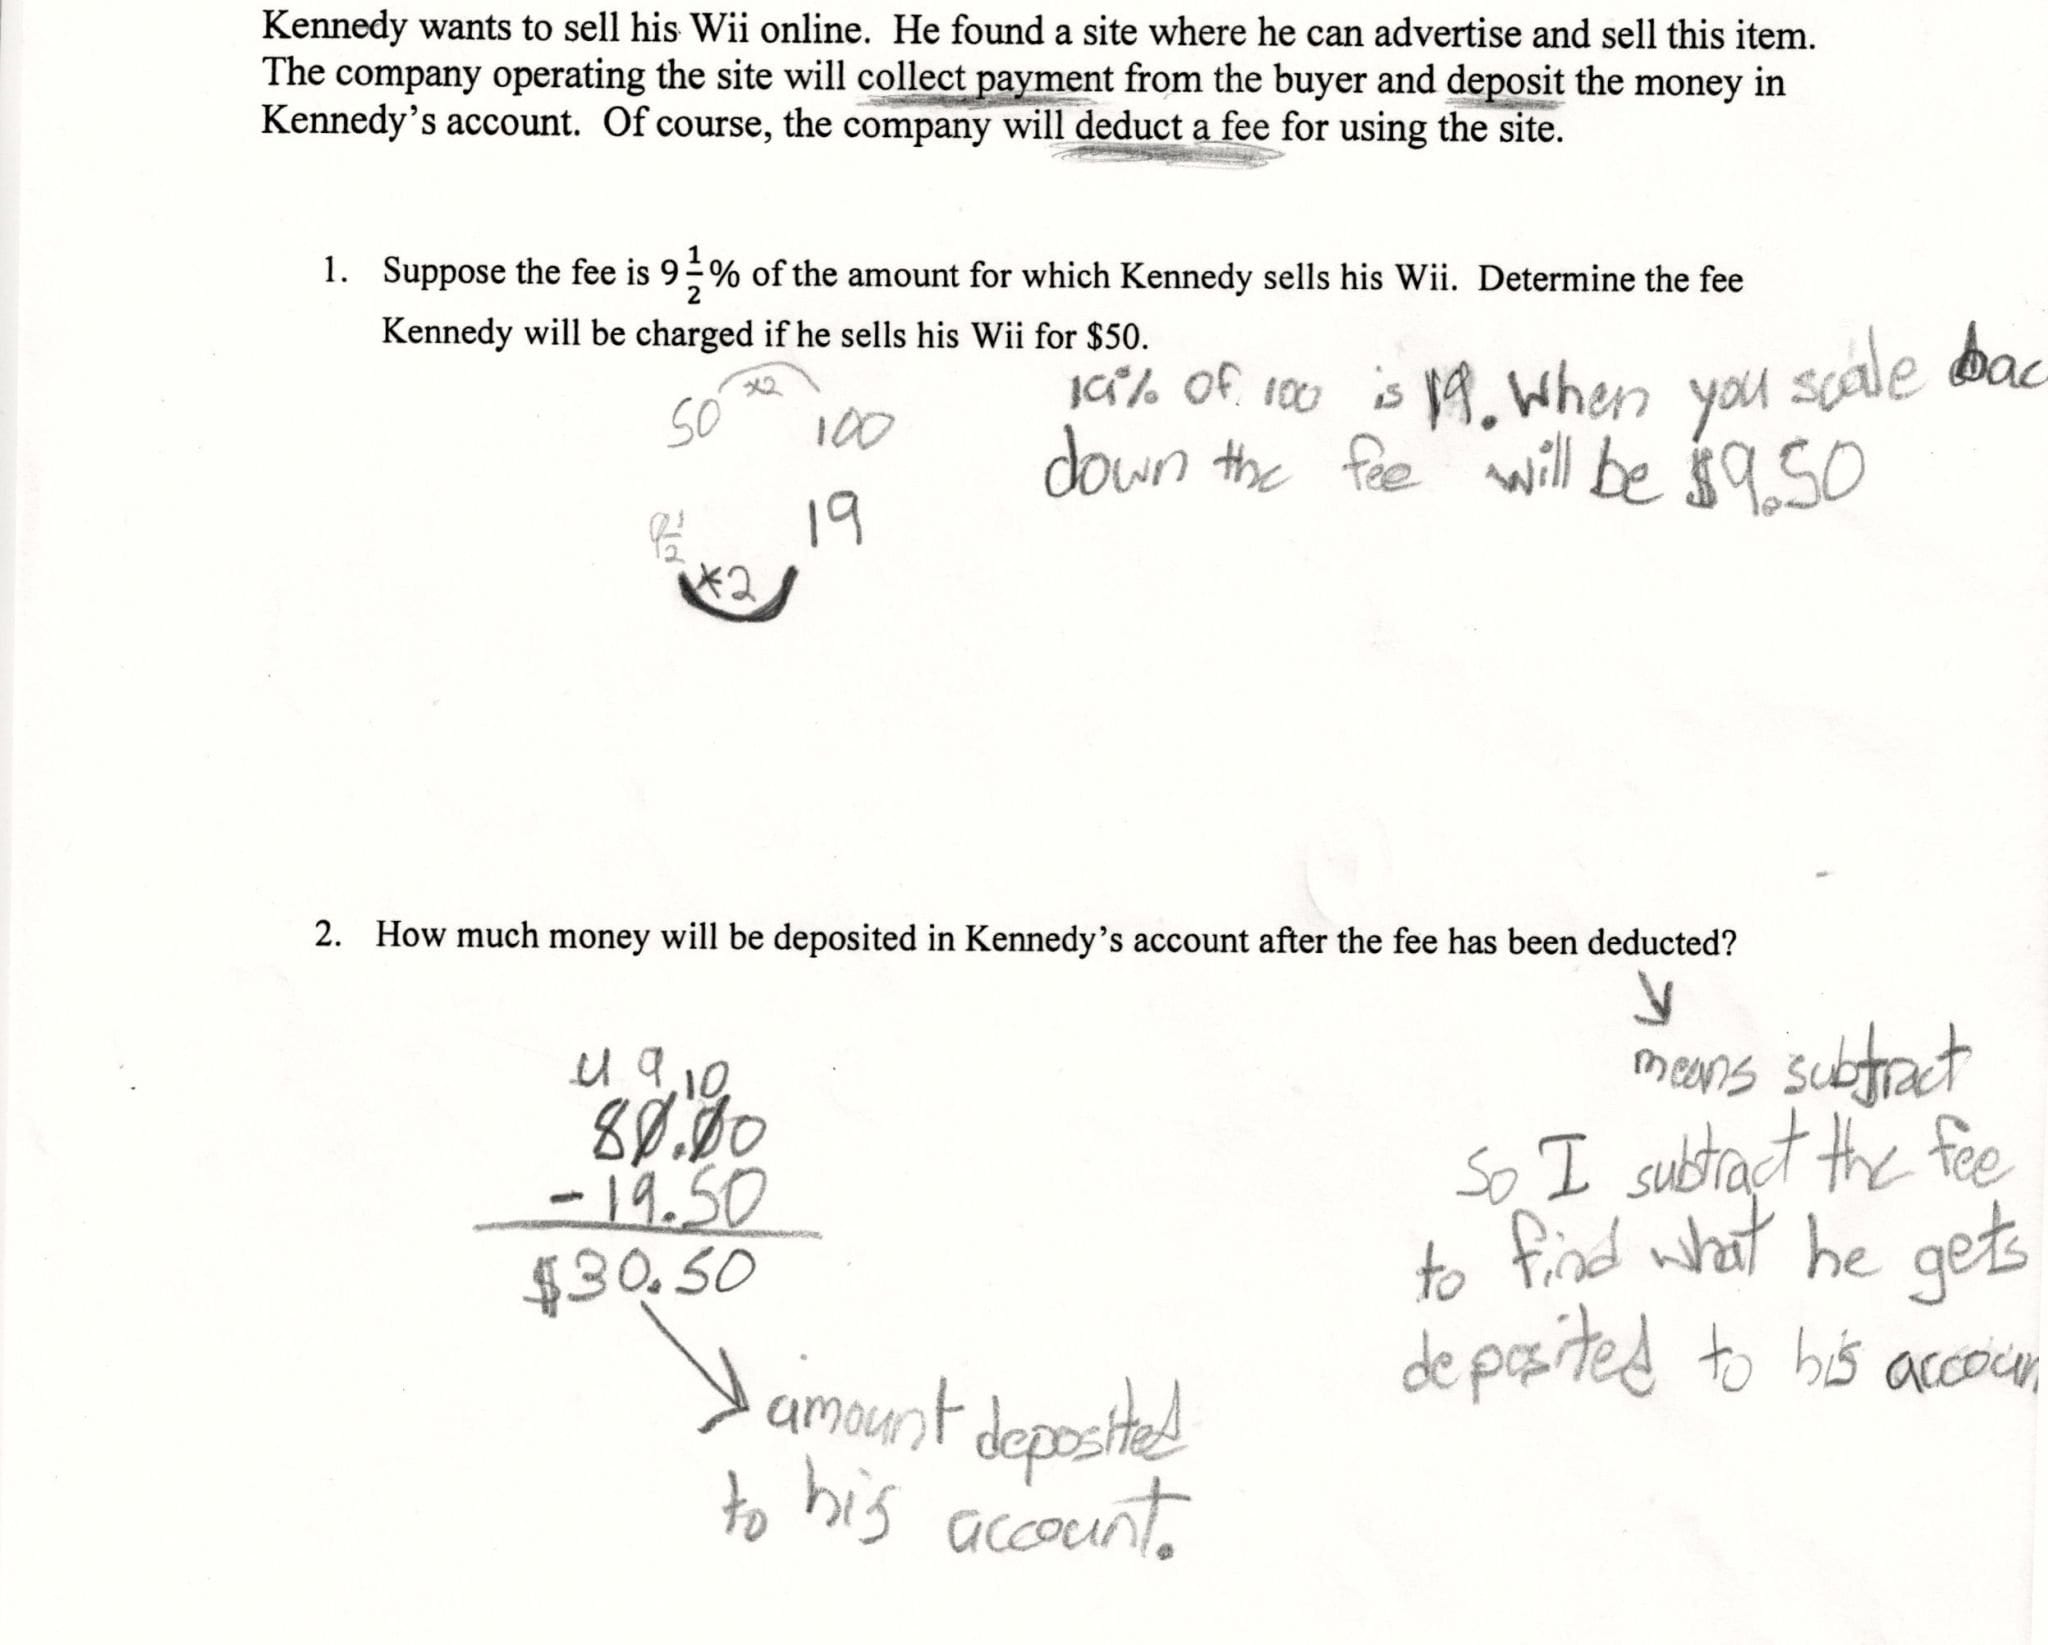 Markups And Markdowns Word Problems Matching Worksheet Answers For Markups And Markdowns Word Problems Matching Worksheet Answers